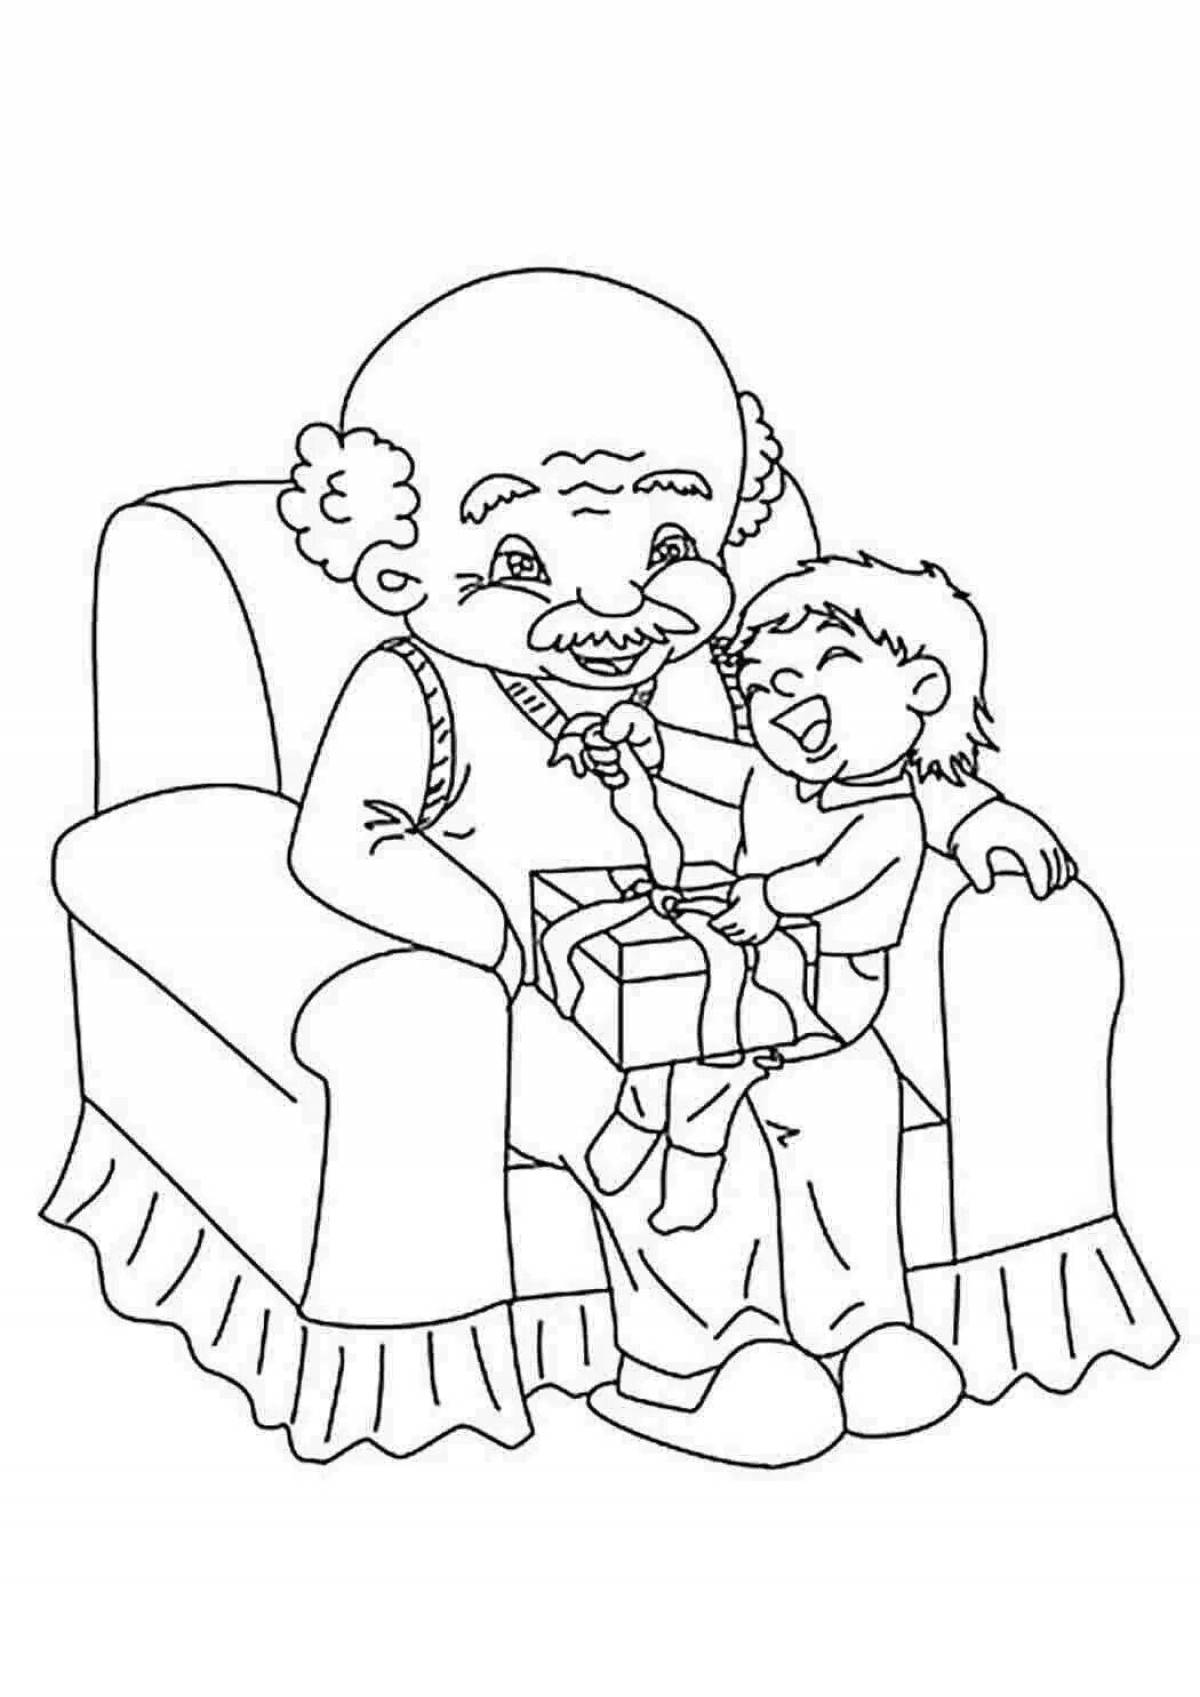 Adorable grandfather coloring book for kids